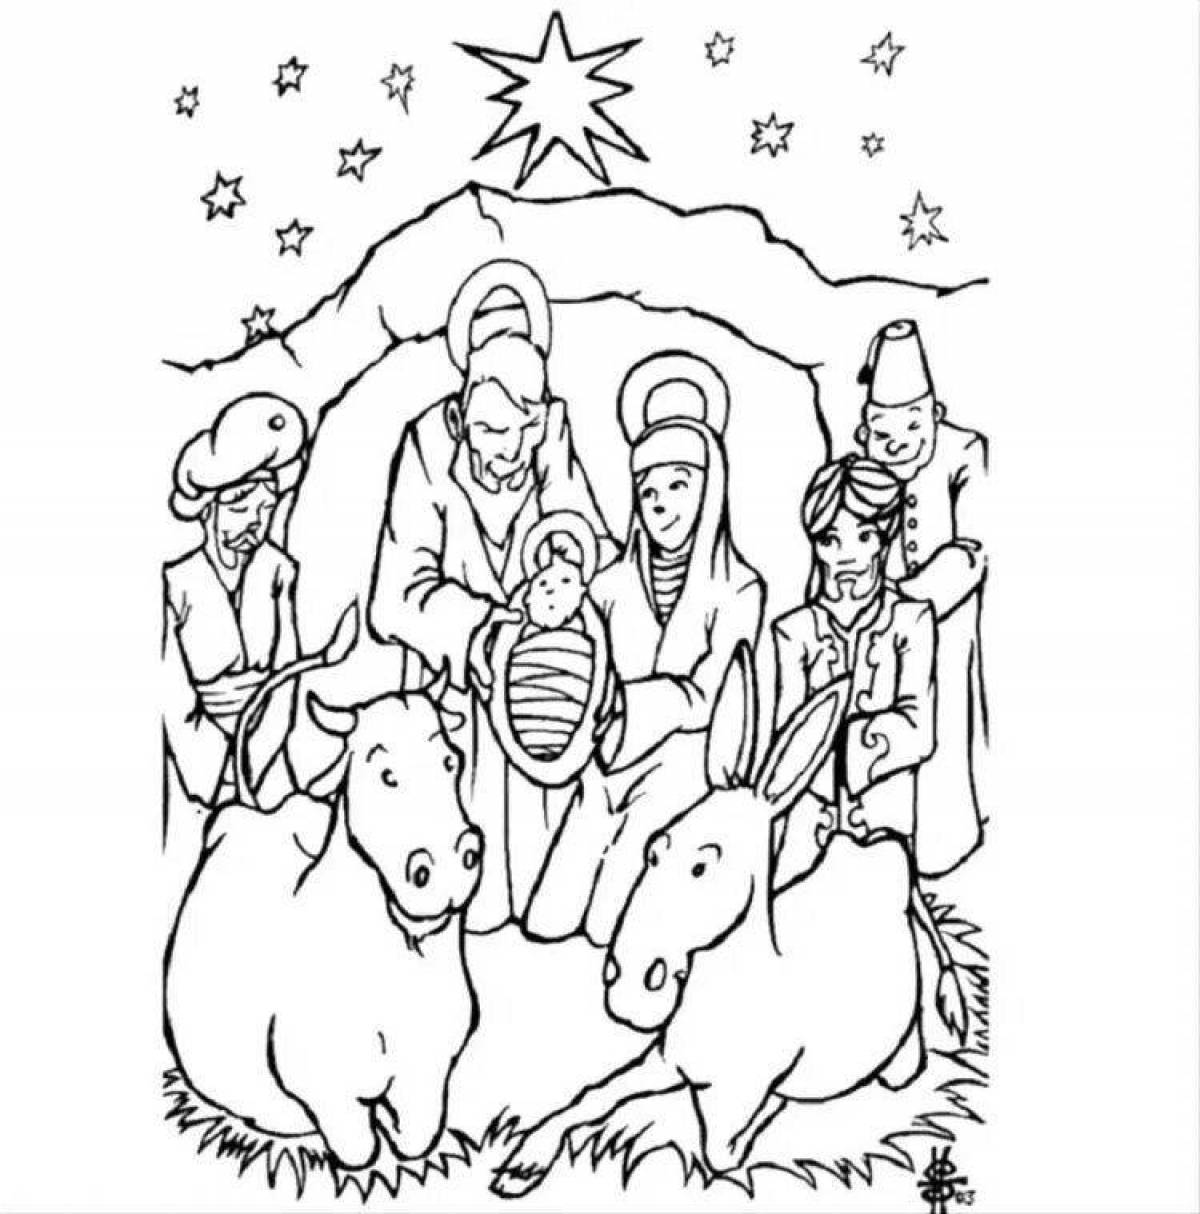 Exalted Star of Bethlehem coloring book